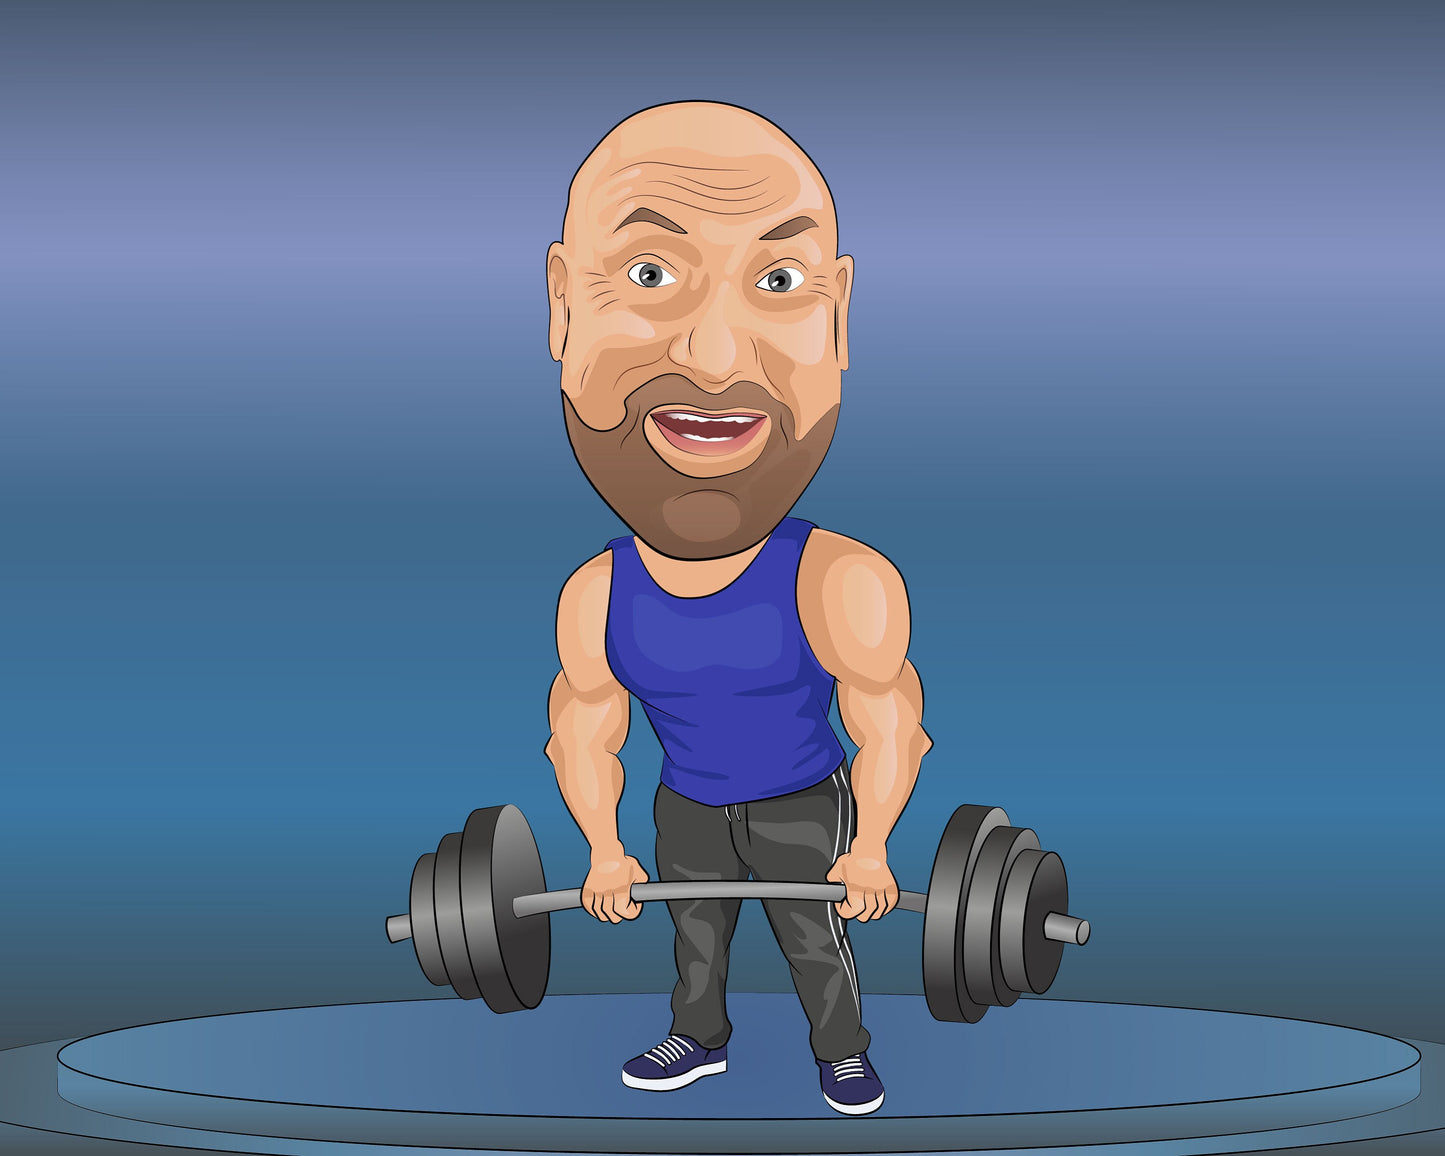 Weightlifter Gift - Custom Caricature From Your Photo/powerlifting/weightlifting gift